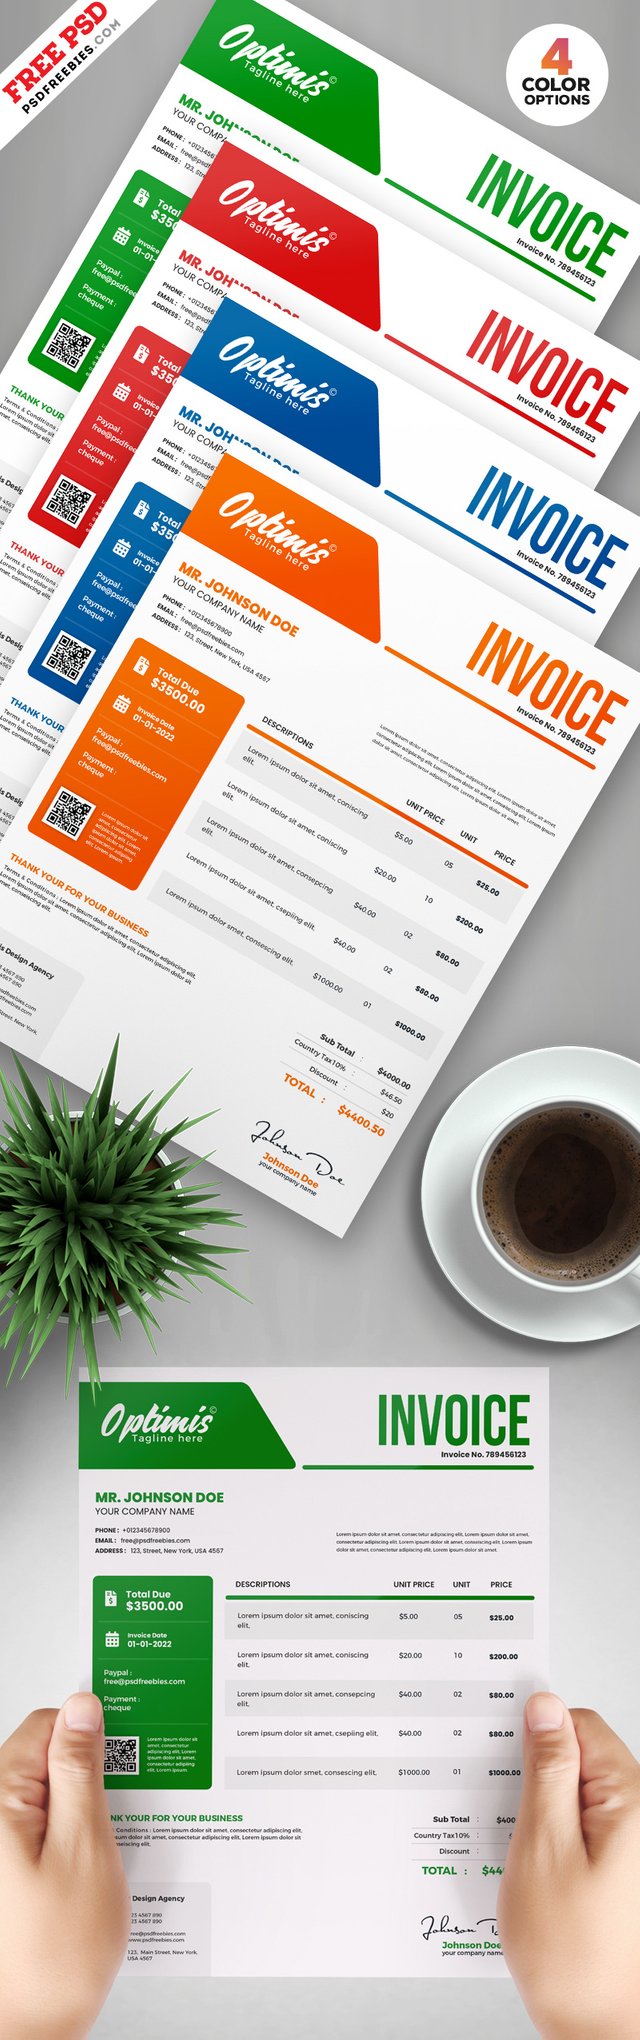 Professional-A4-Invoice-Design-Template-PSD-Preview.jpg